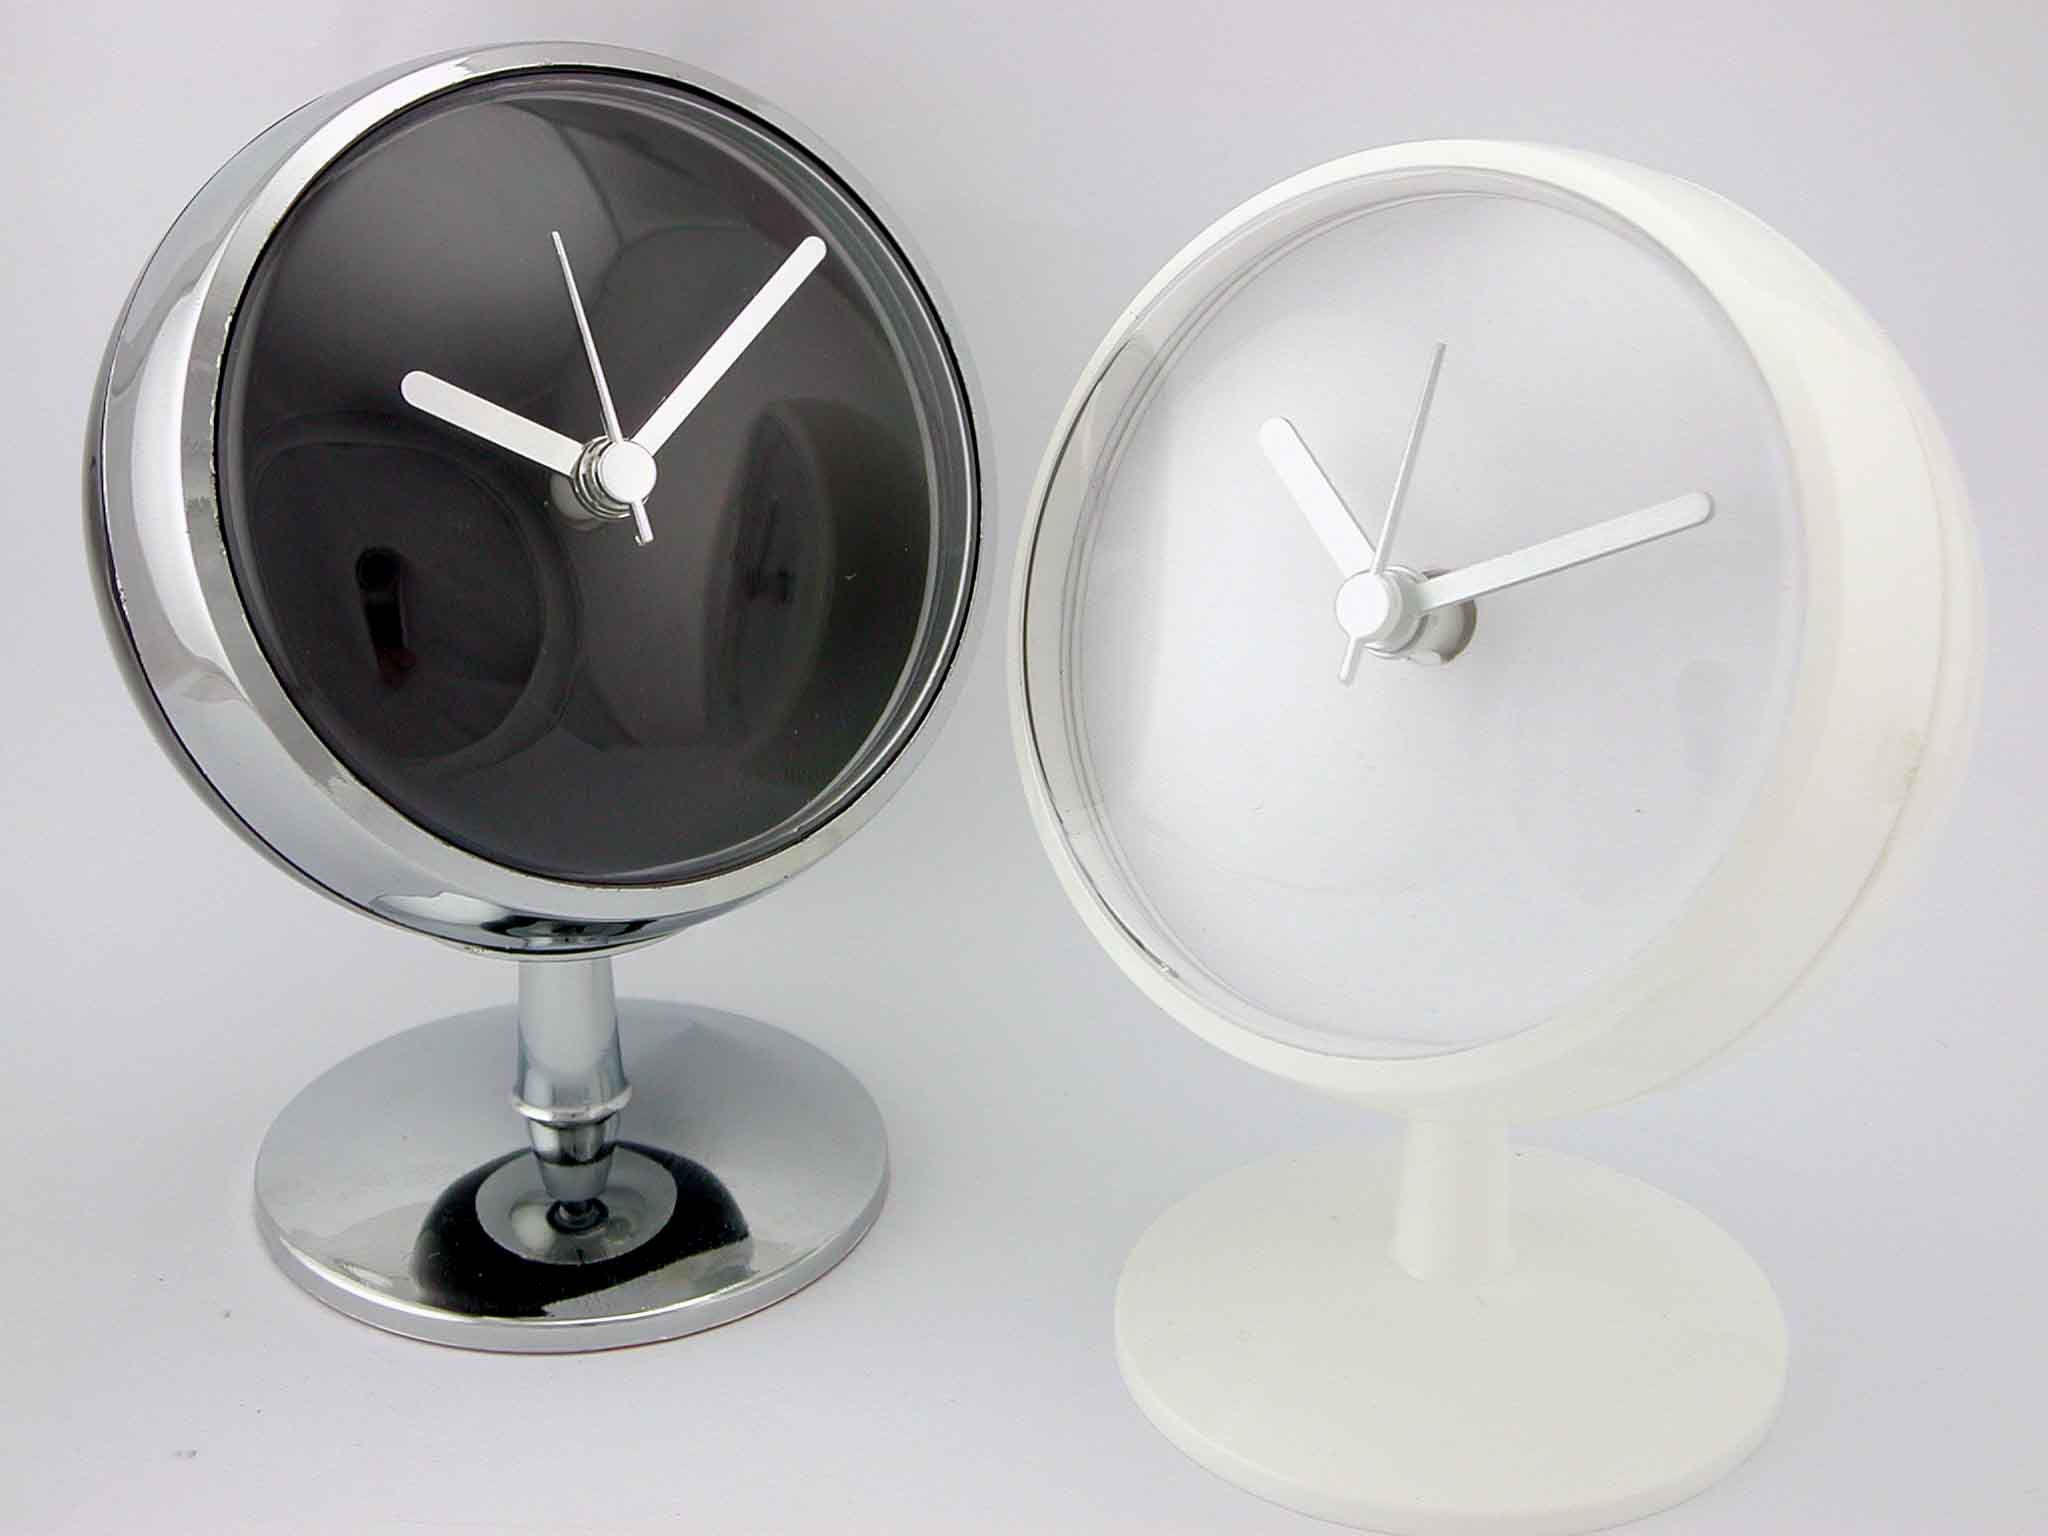  our item - Plastic Ball Shape Analog Clock With Stand ( our item - Plastic Ball Shape Analog Clock With Stand)